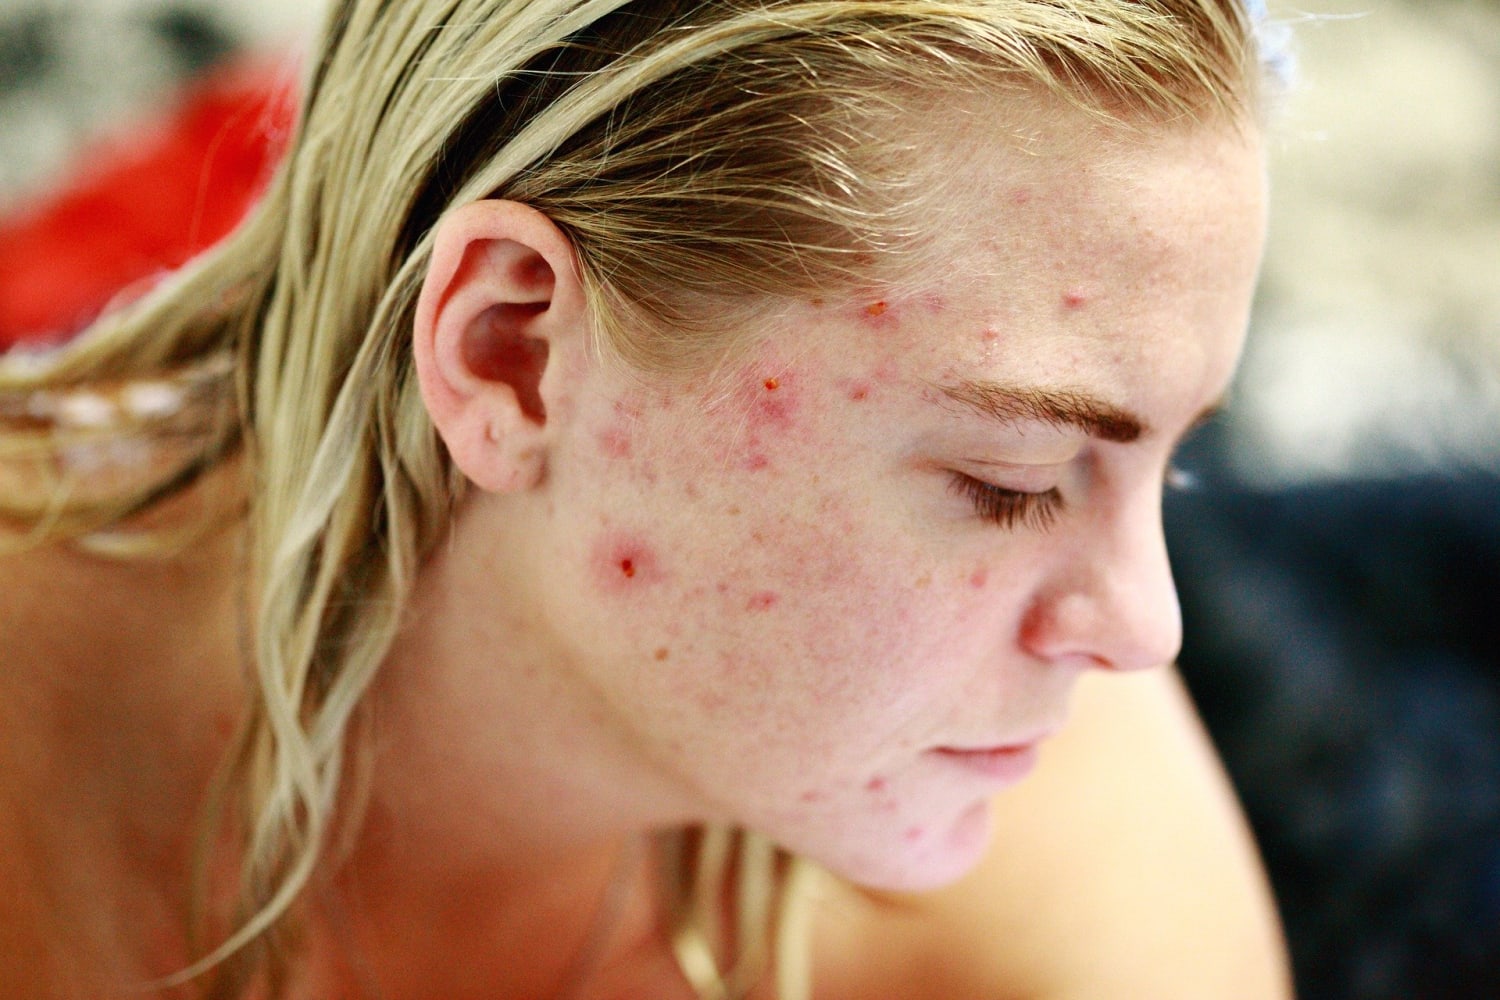 What Are Some Effective Natural Acne Medications?